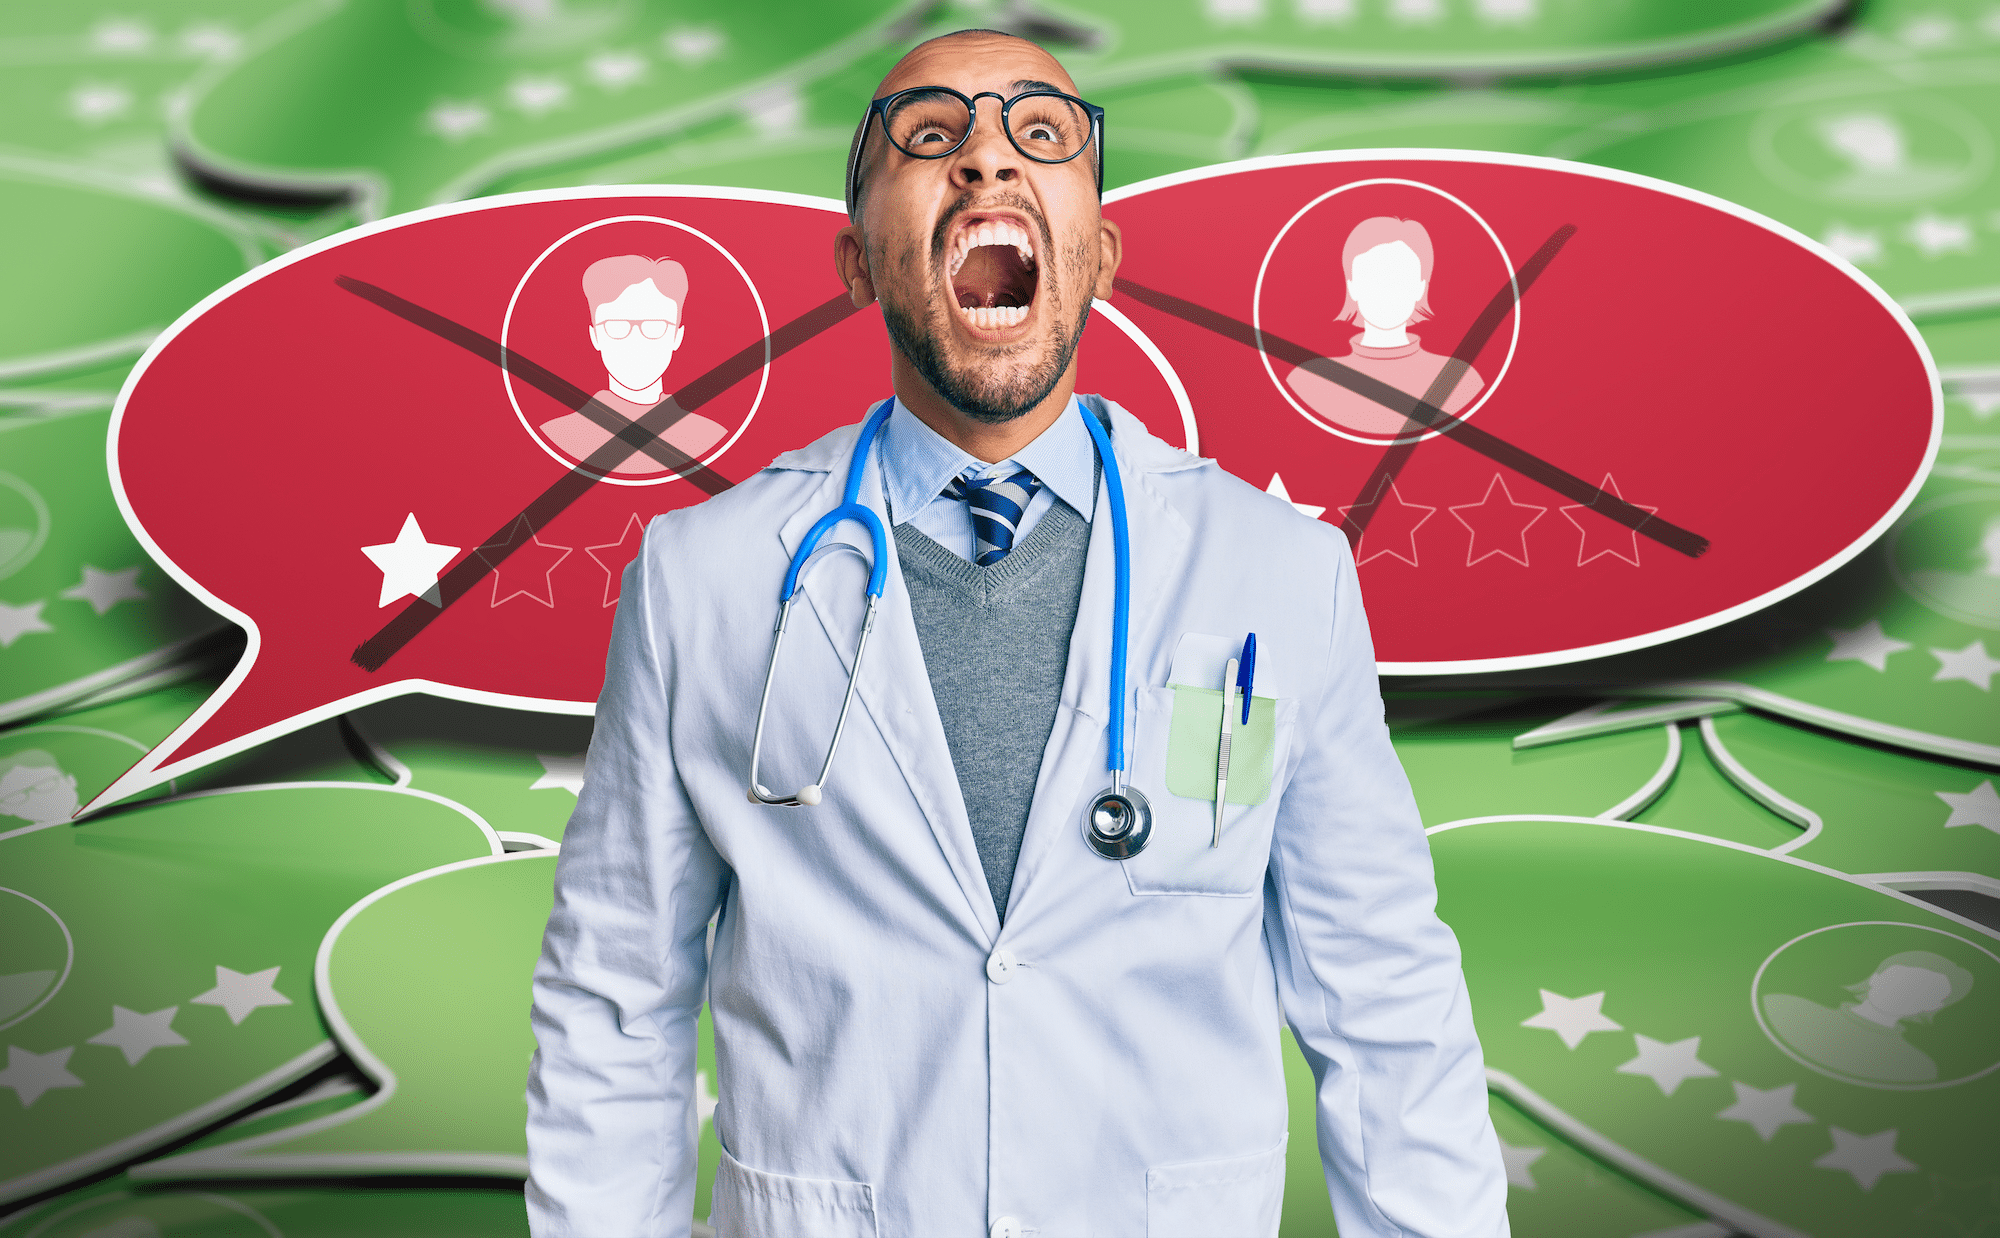 How Doctors Can Manage a Fake Google Review